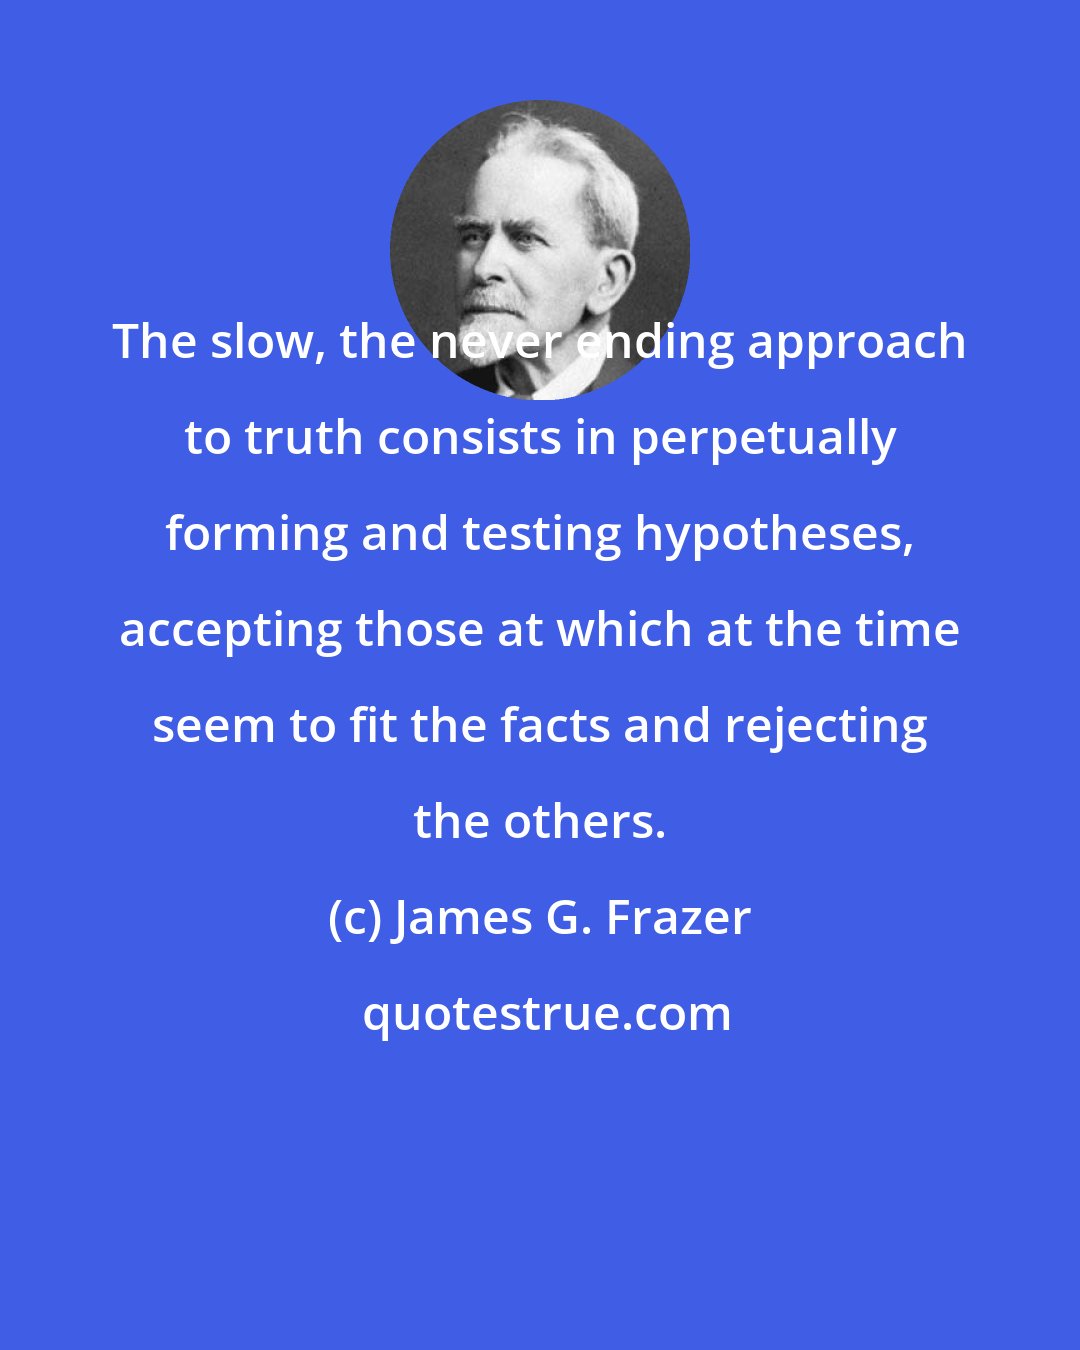 James G. Frazer: The slow, the never ending approach to truth consists in perpetually forming and testing hypotheses, accepting those at which at the time seem to fit the facts and rejecting the others.